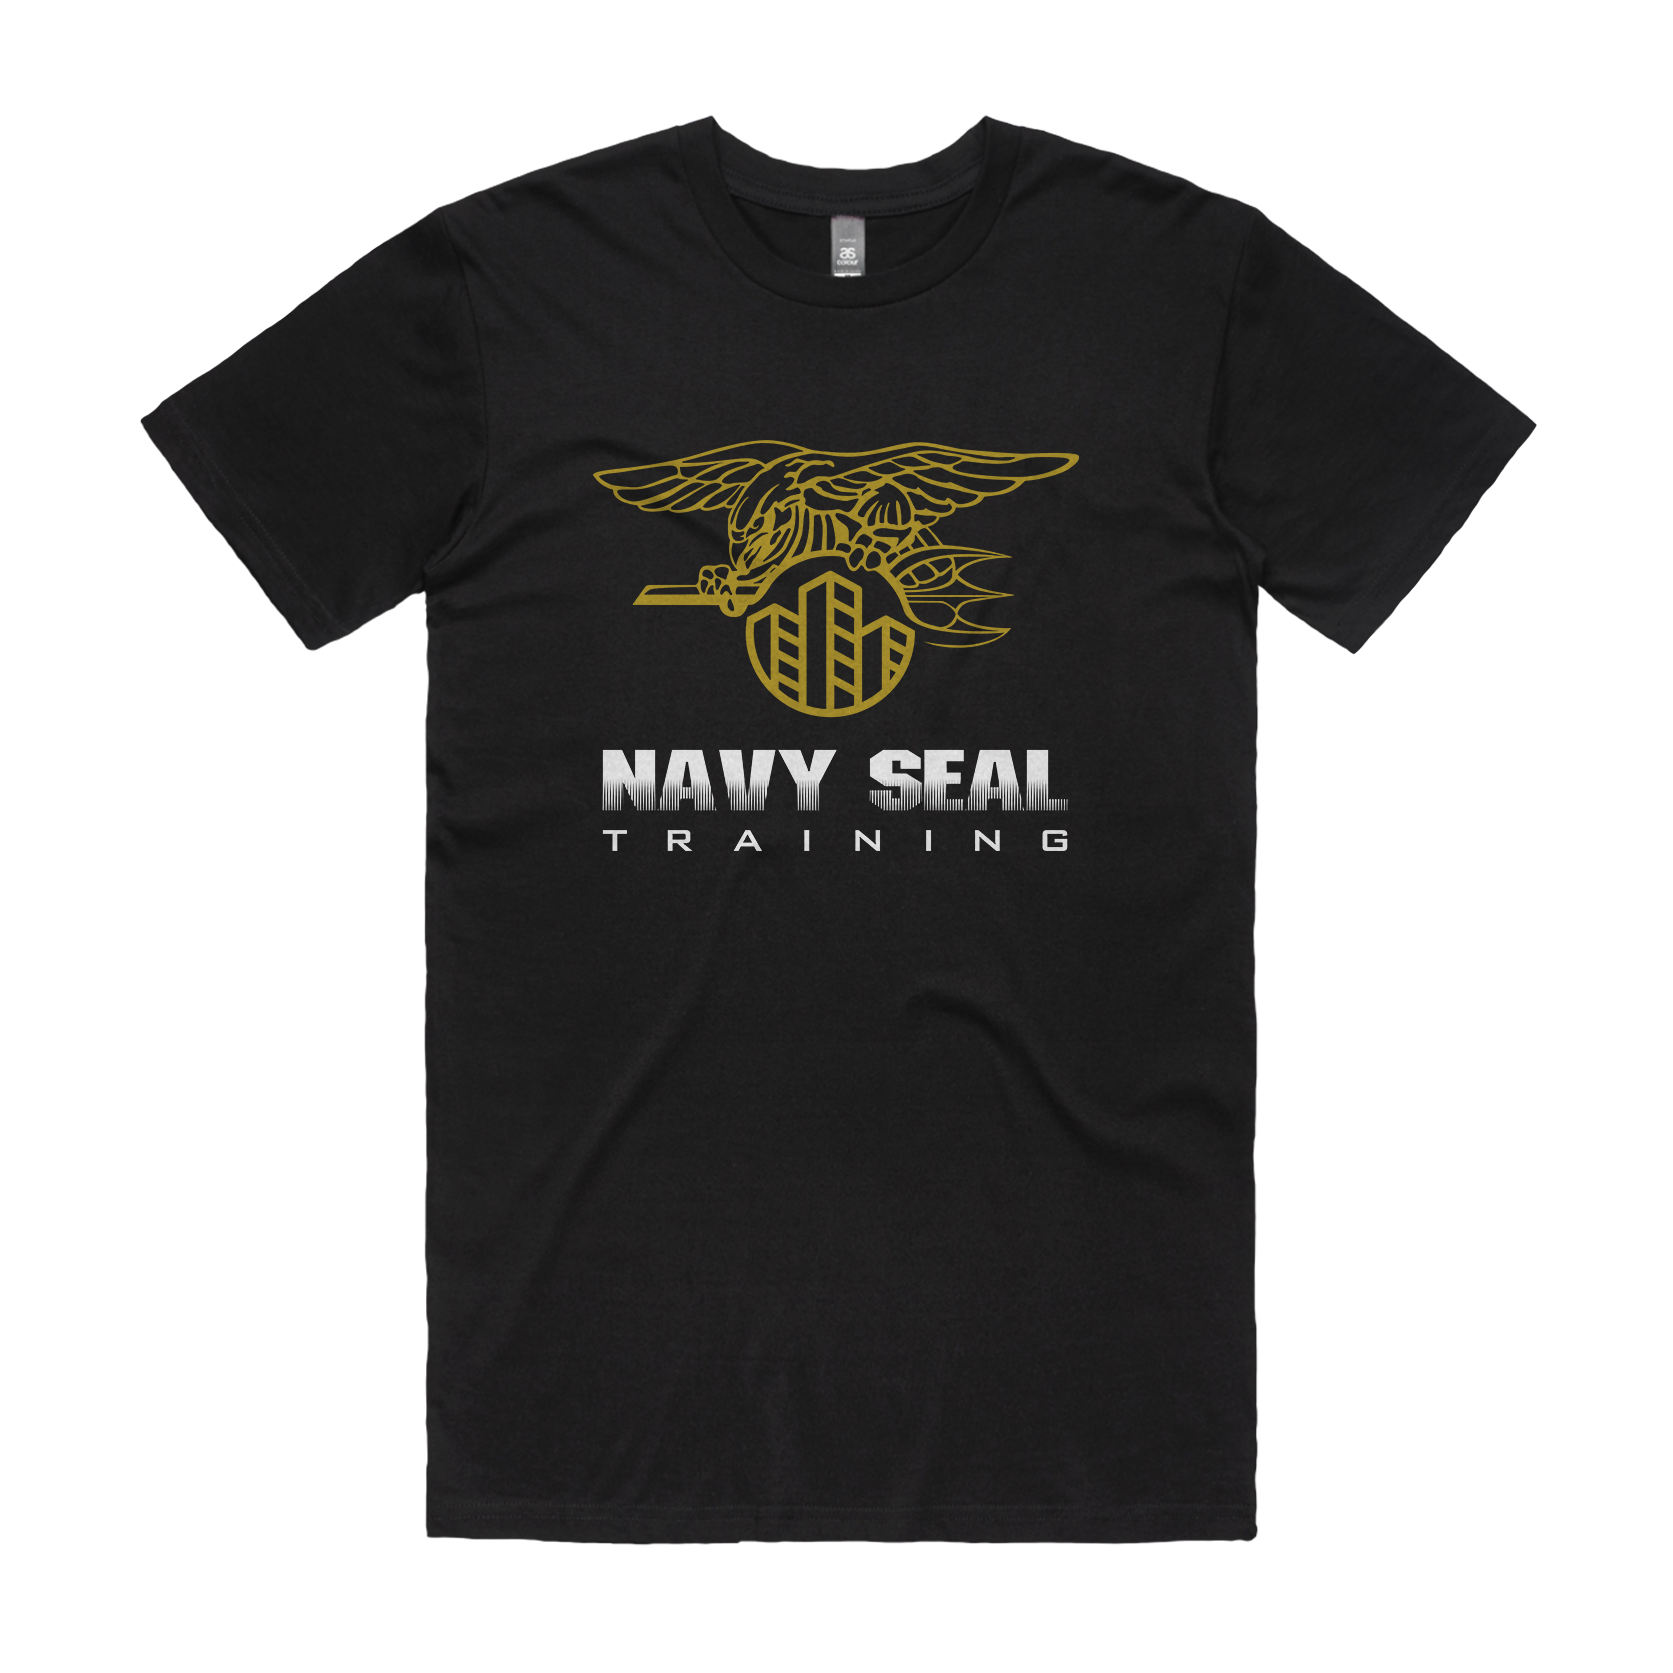 Navy Seal Training T-Shirt - Site Inspections